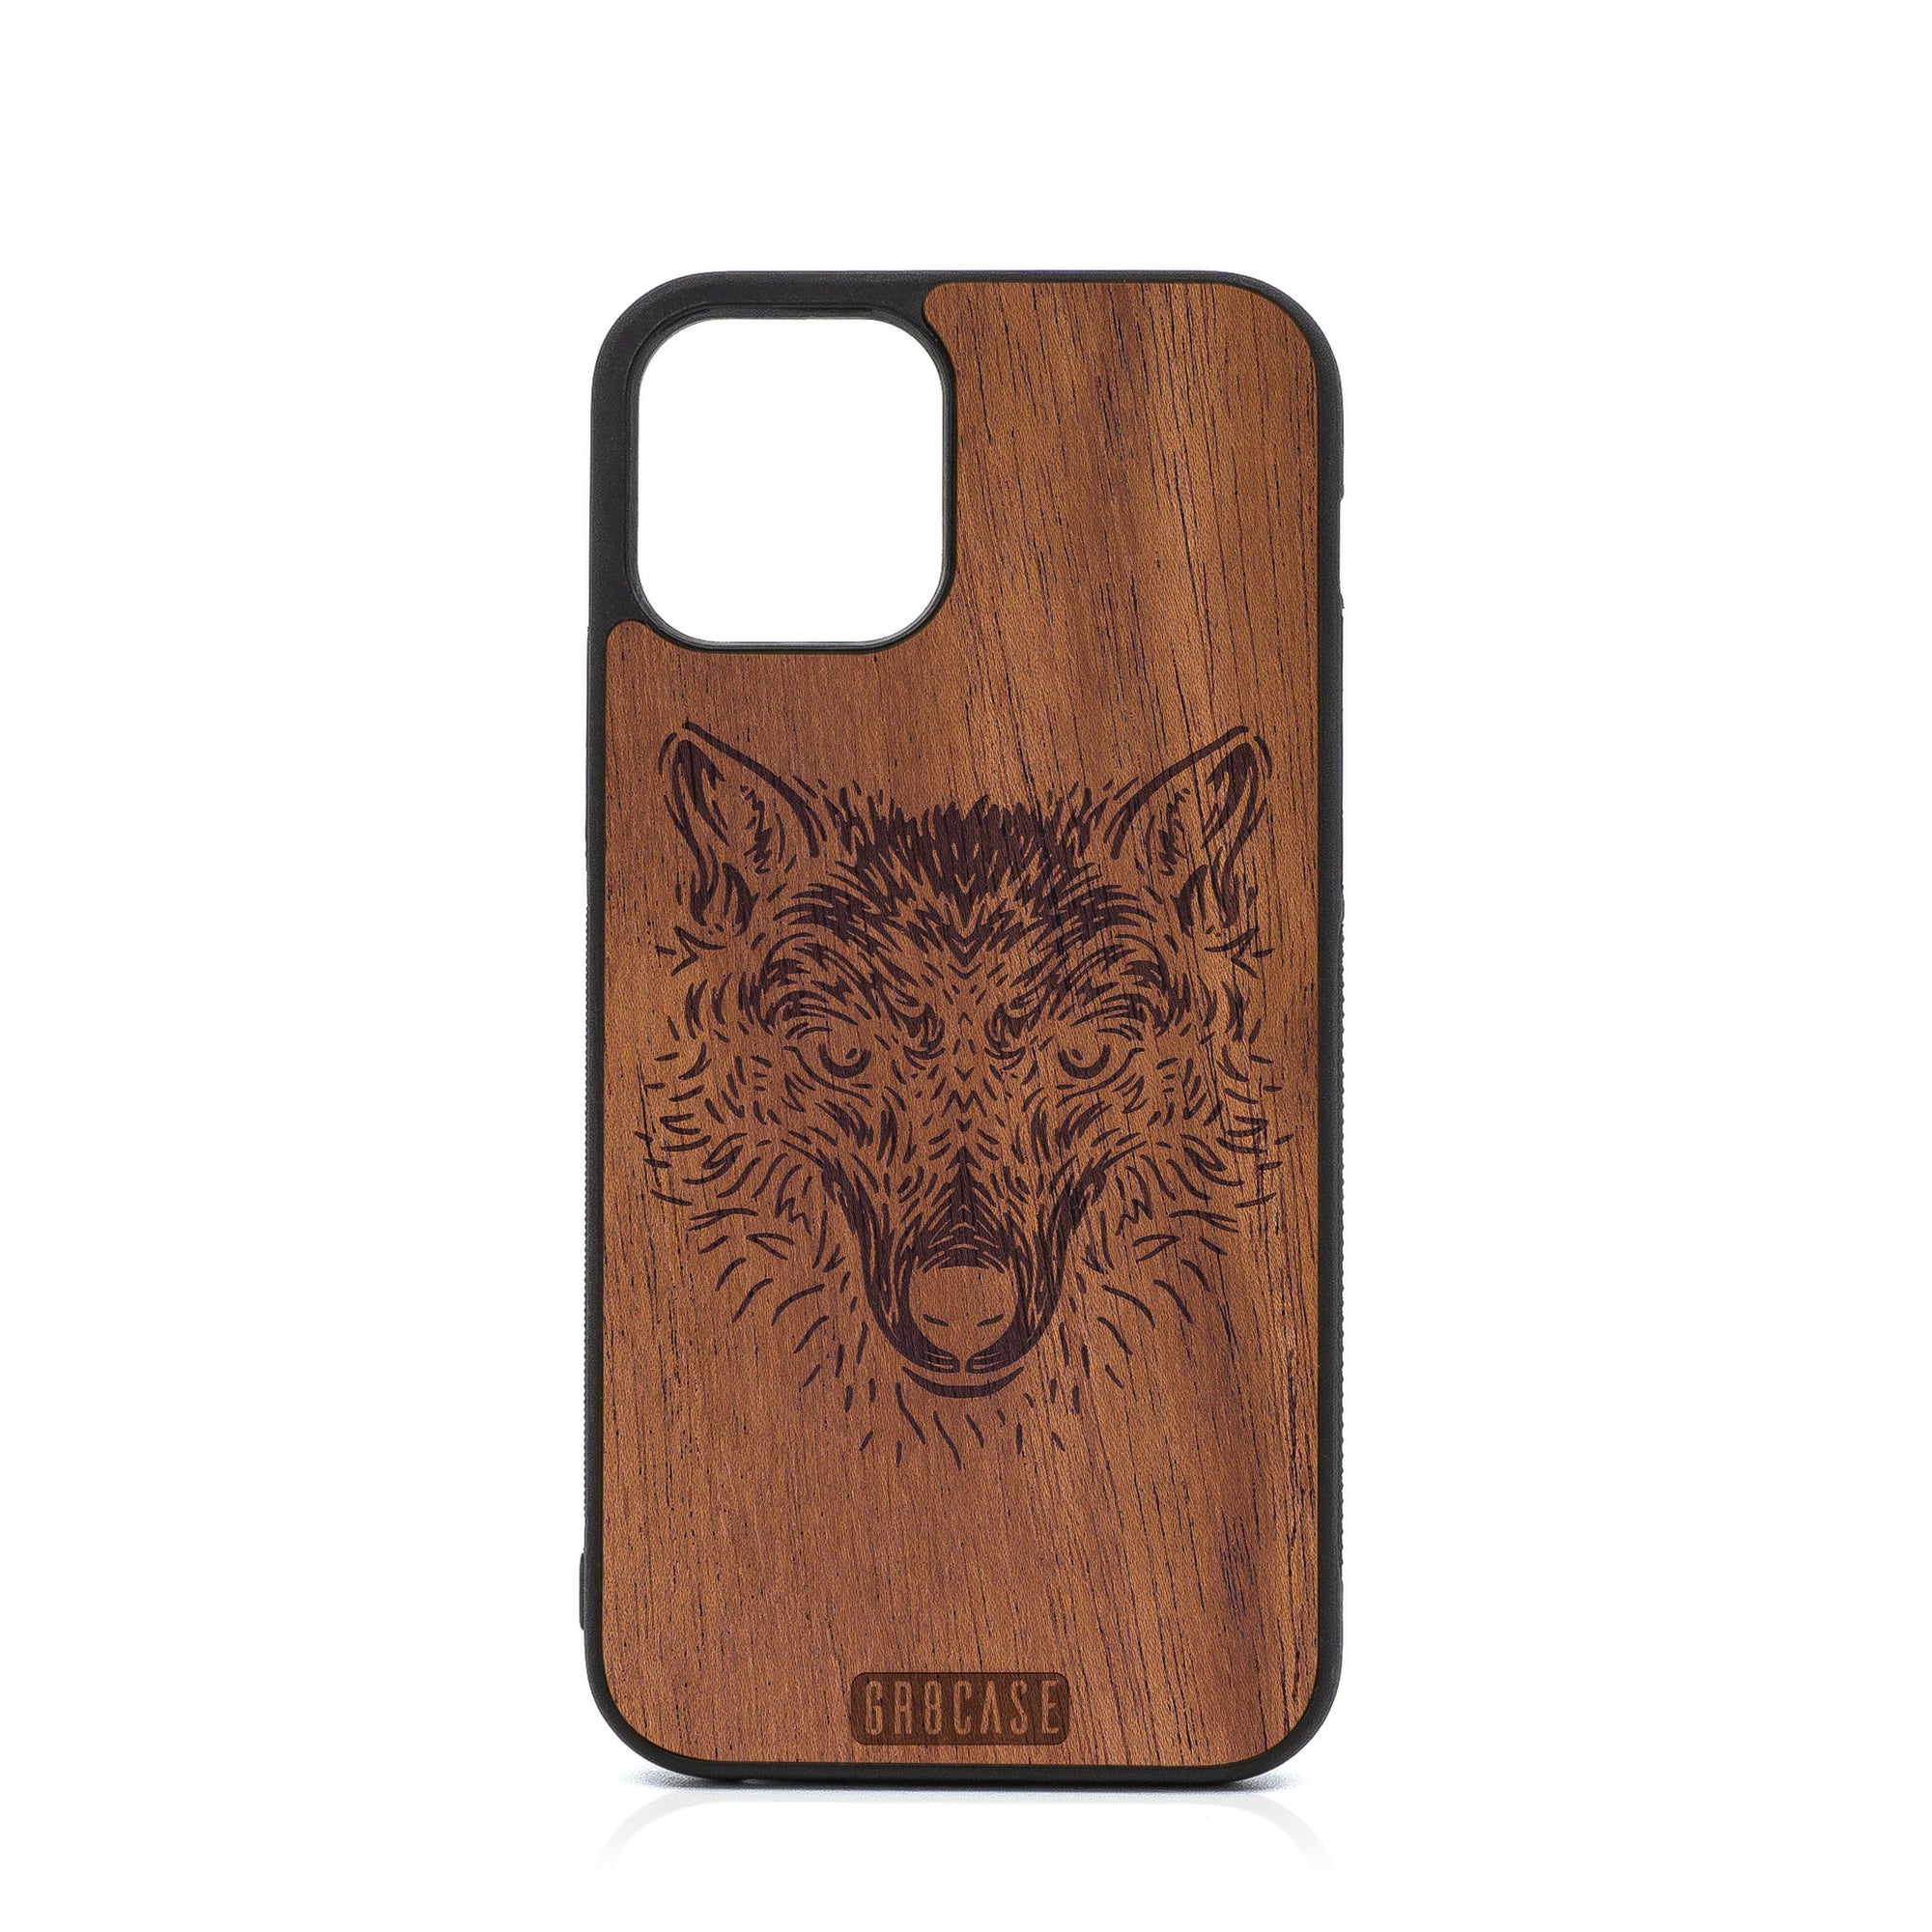 Furry Wolf Design Wood Case For iPhone 12